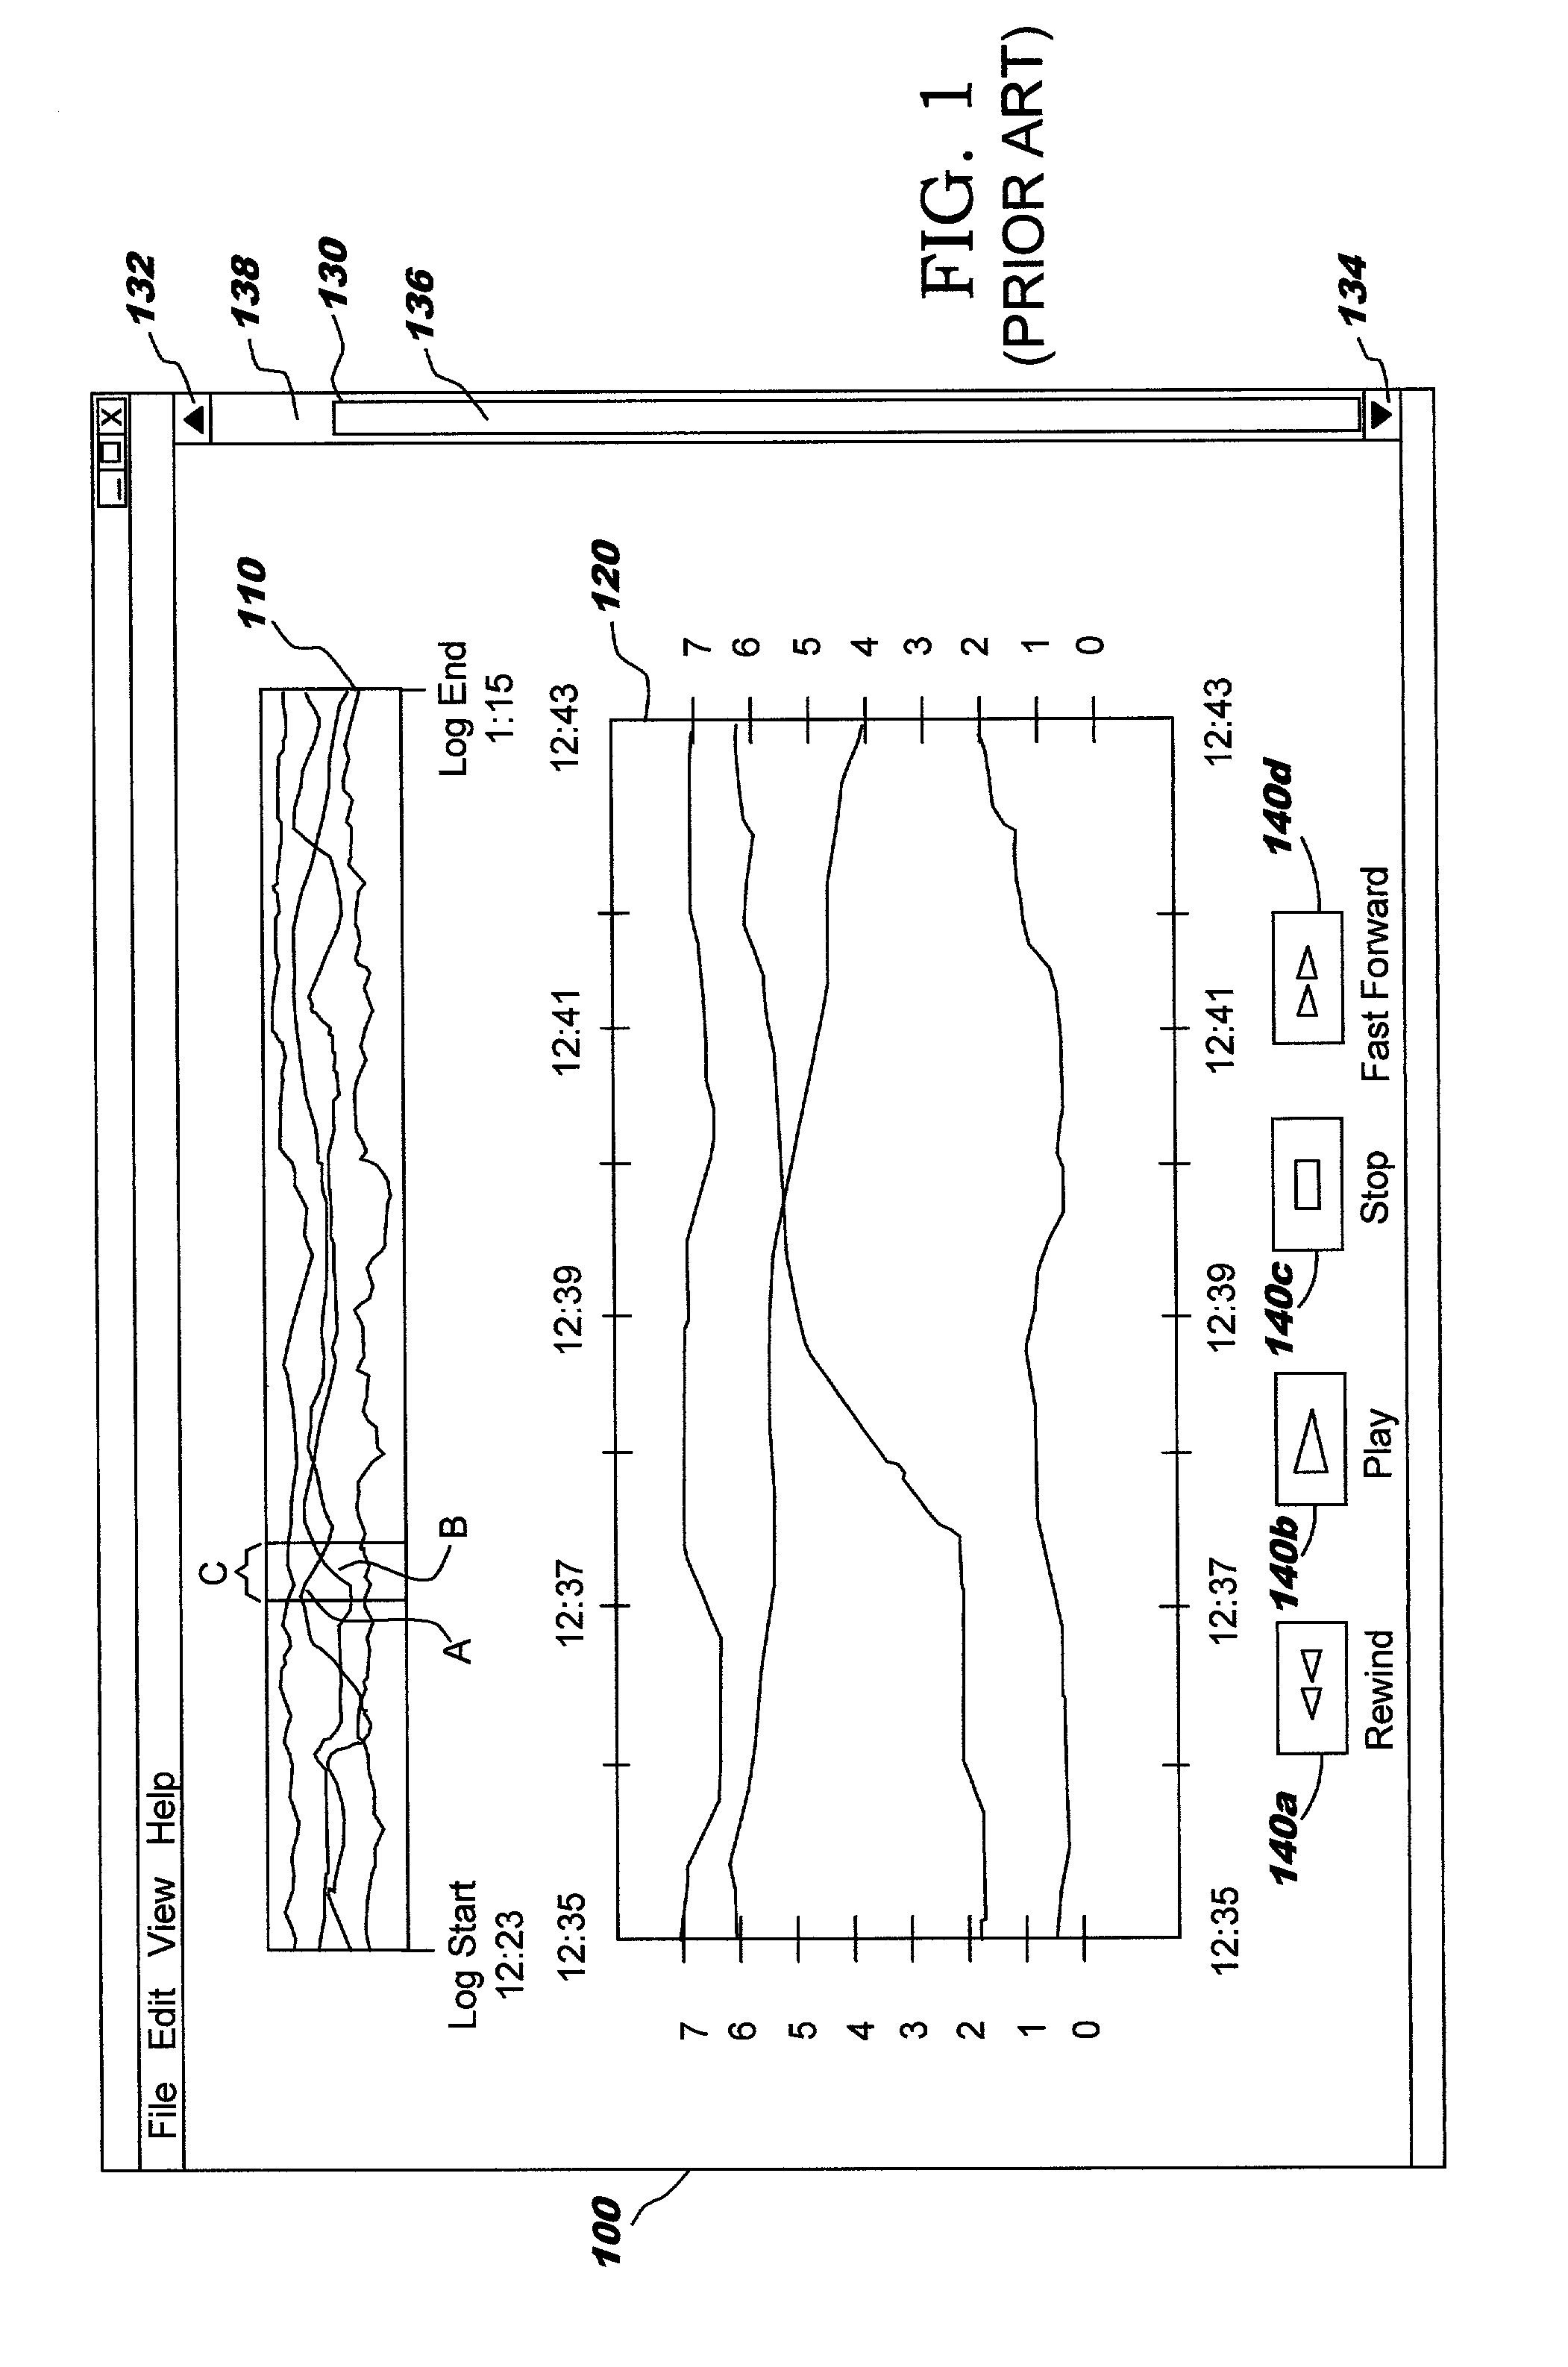 Graphical user interface for direct control of display of data